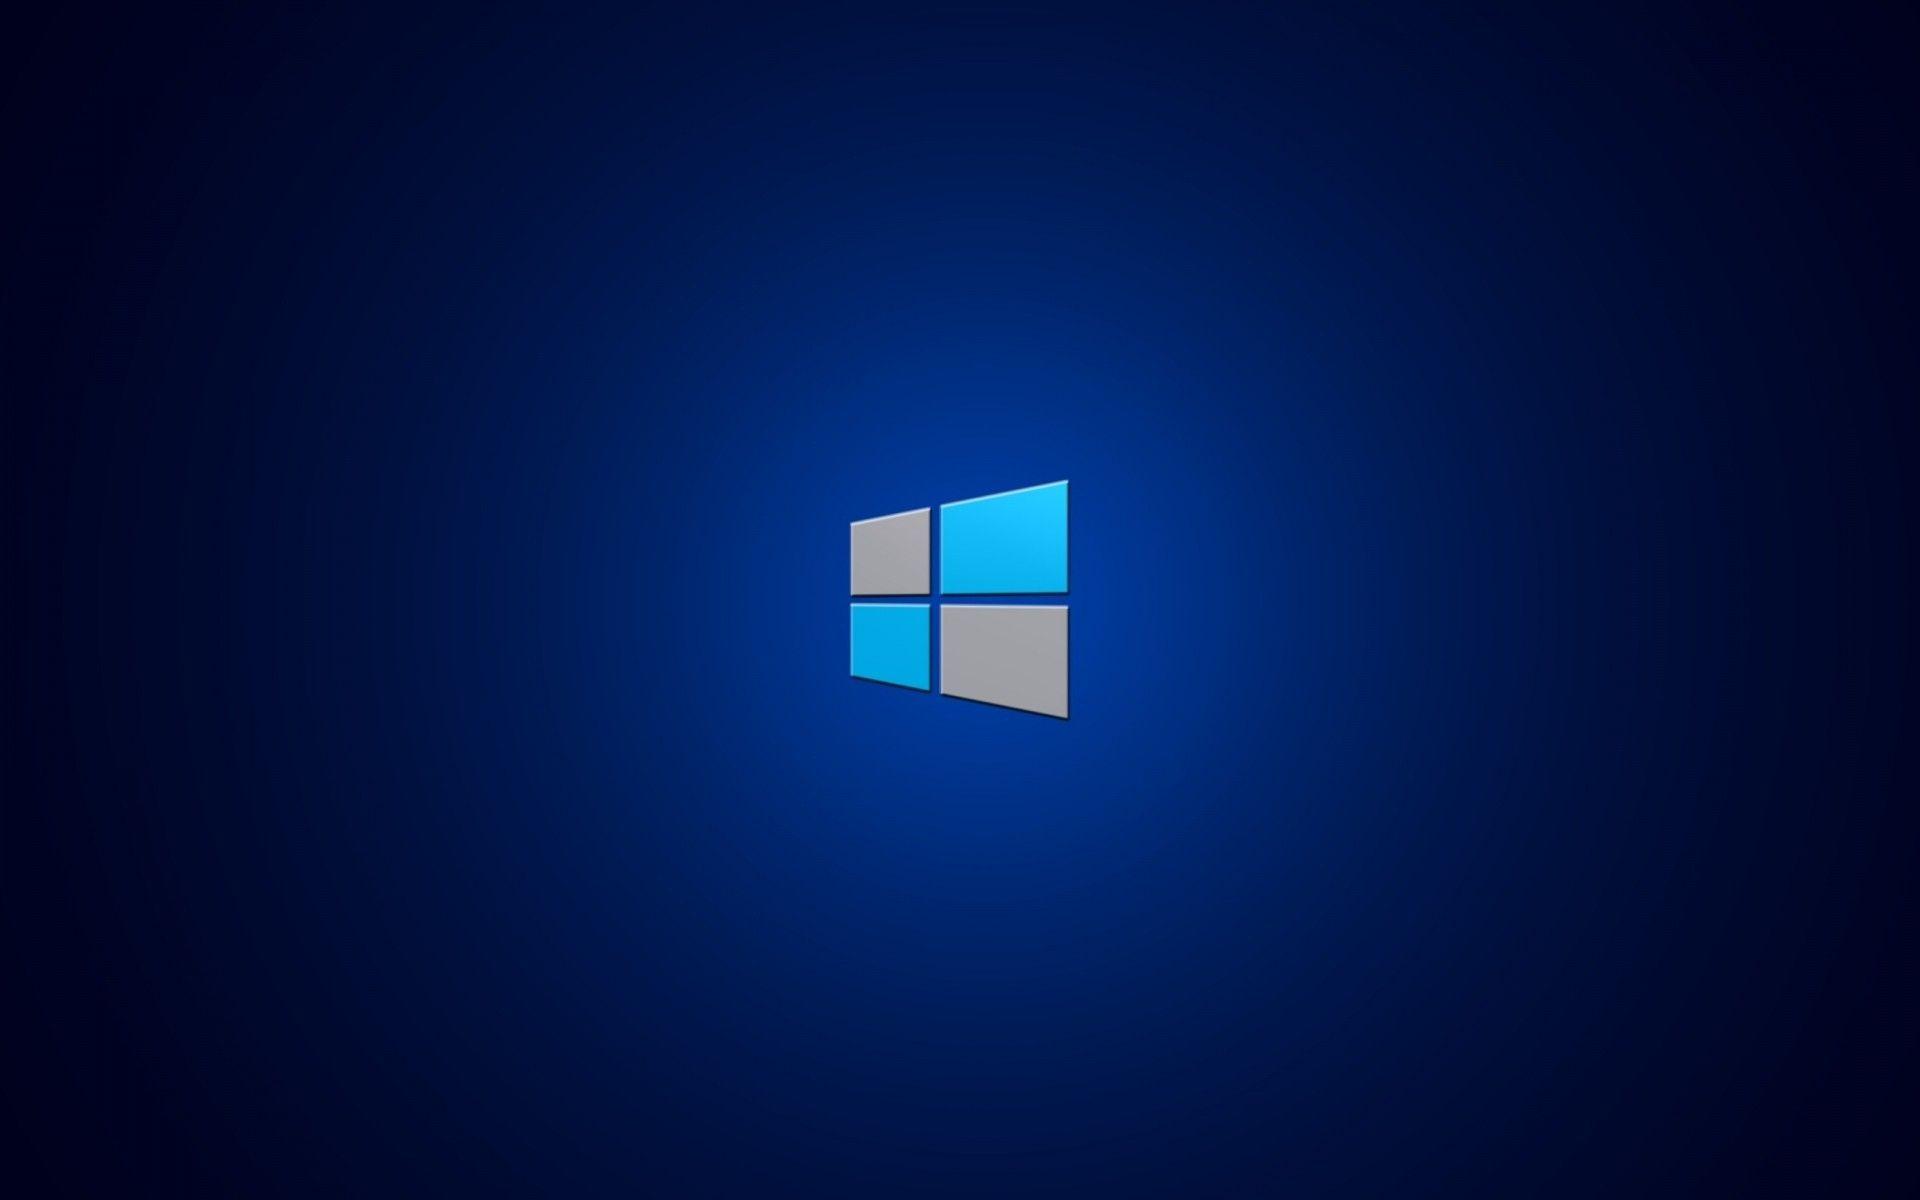 Windows 8 Background. Android wallpaper for free